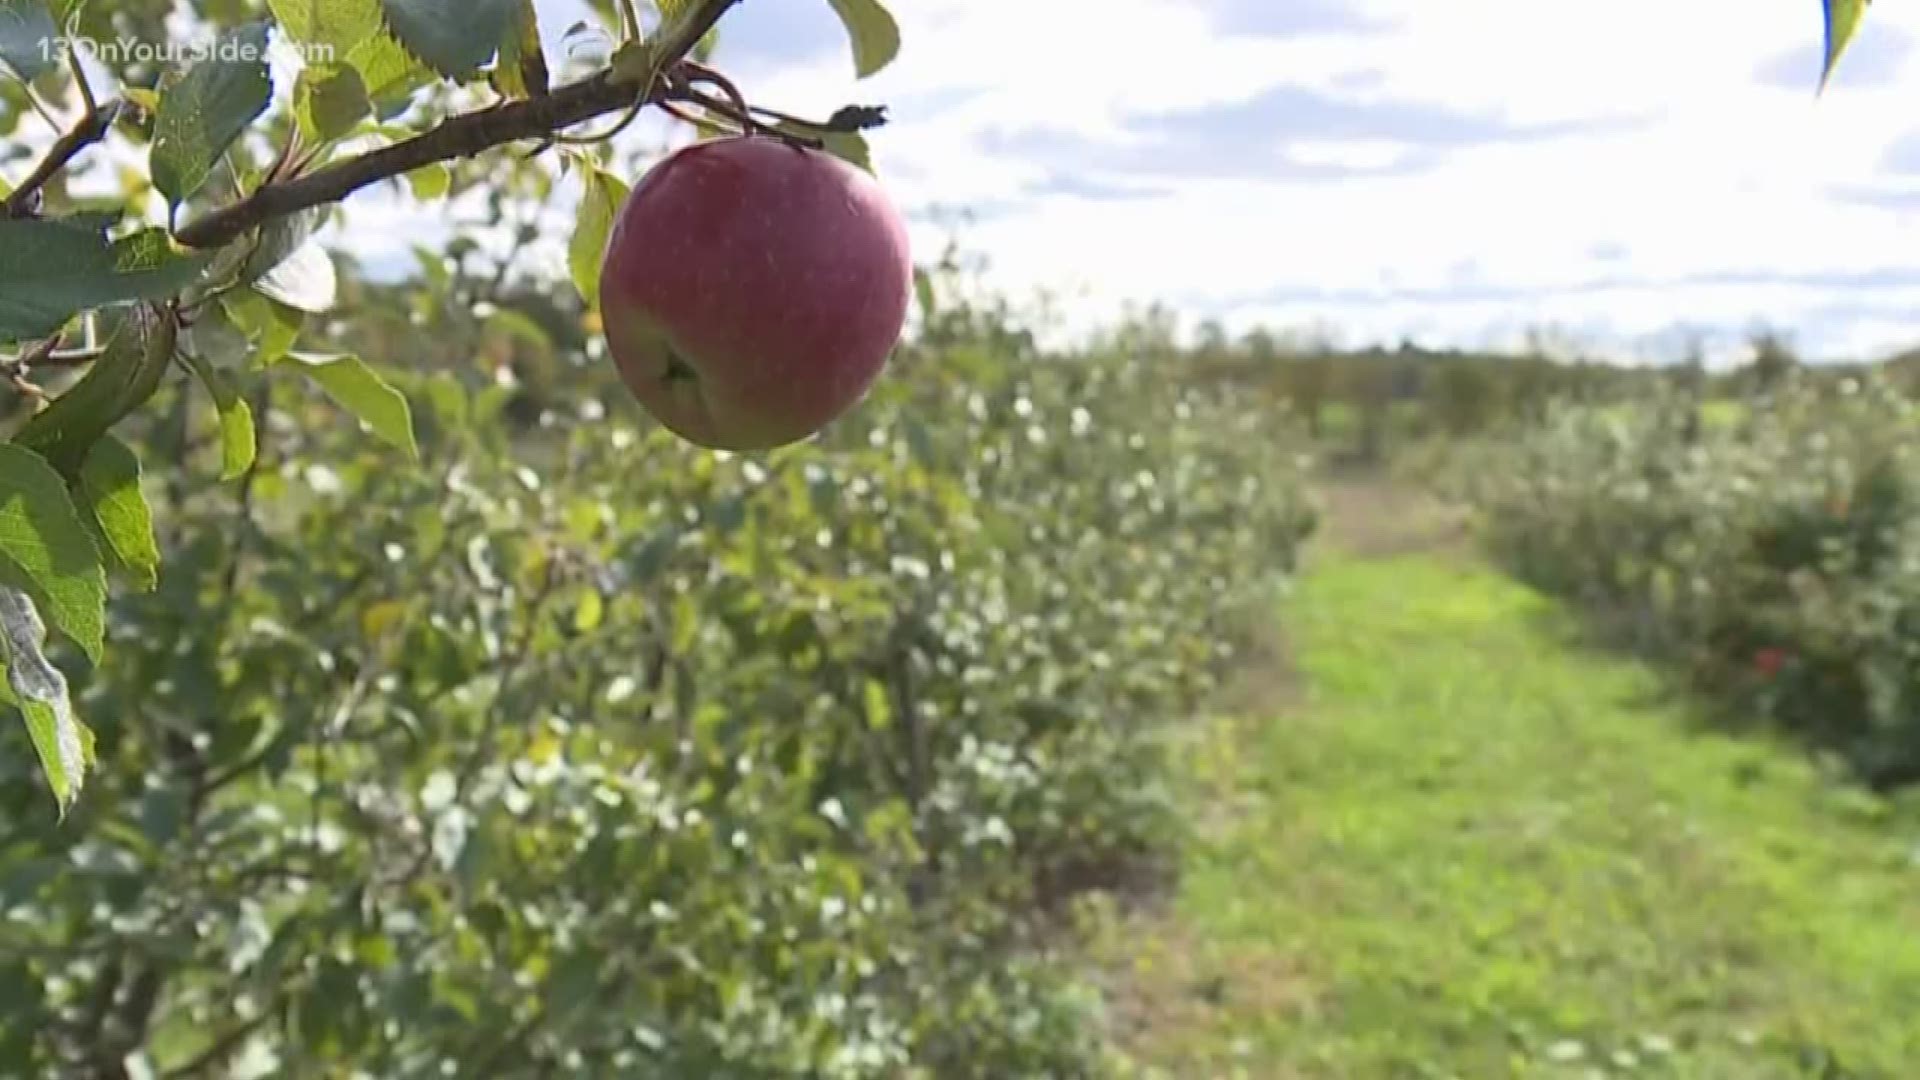 The Spicer family says 22,000 apples were stolen from their orchard in Hartland, Michigan.